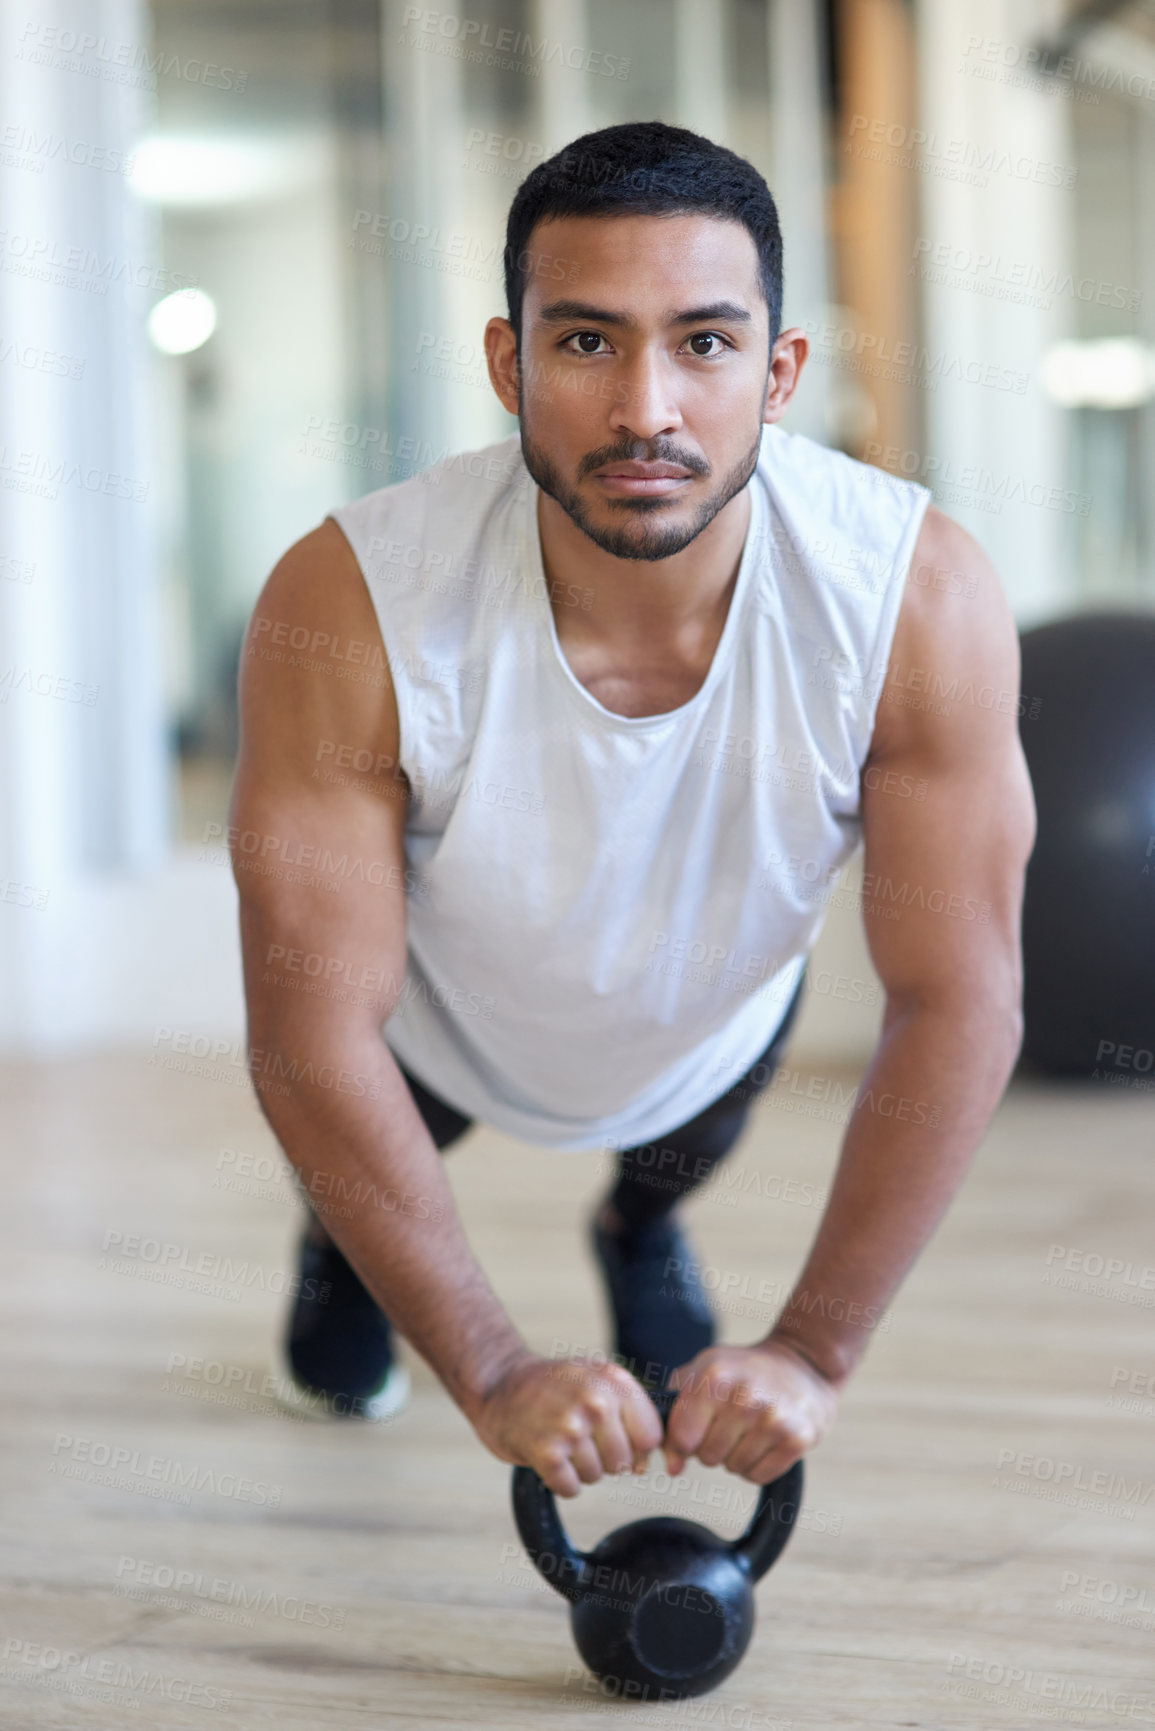 Buy stock photo Shot of a male athlete working out with a kettle bell